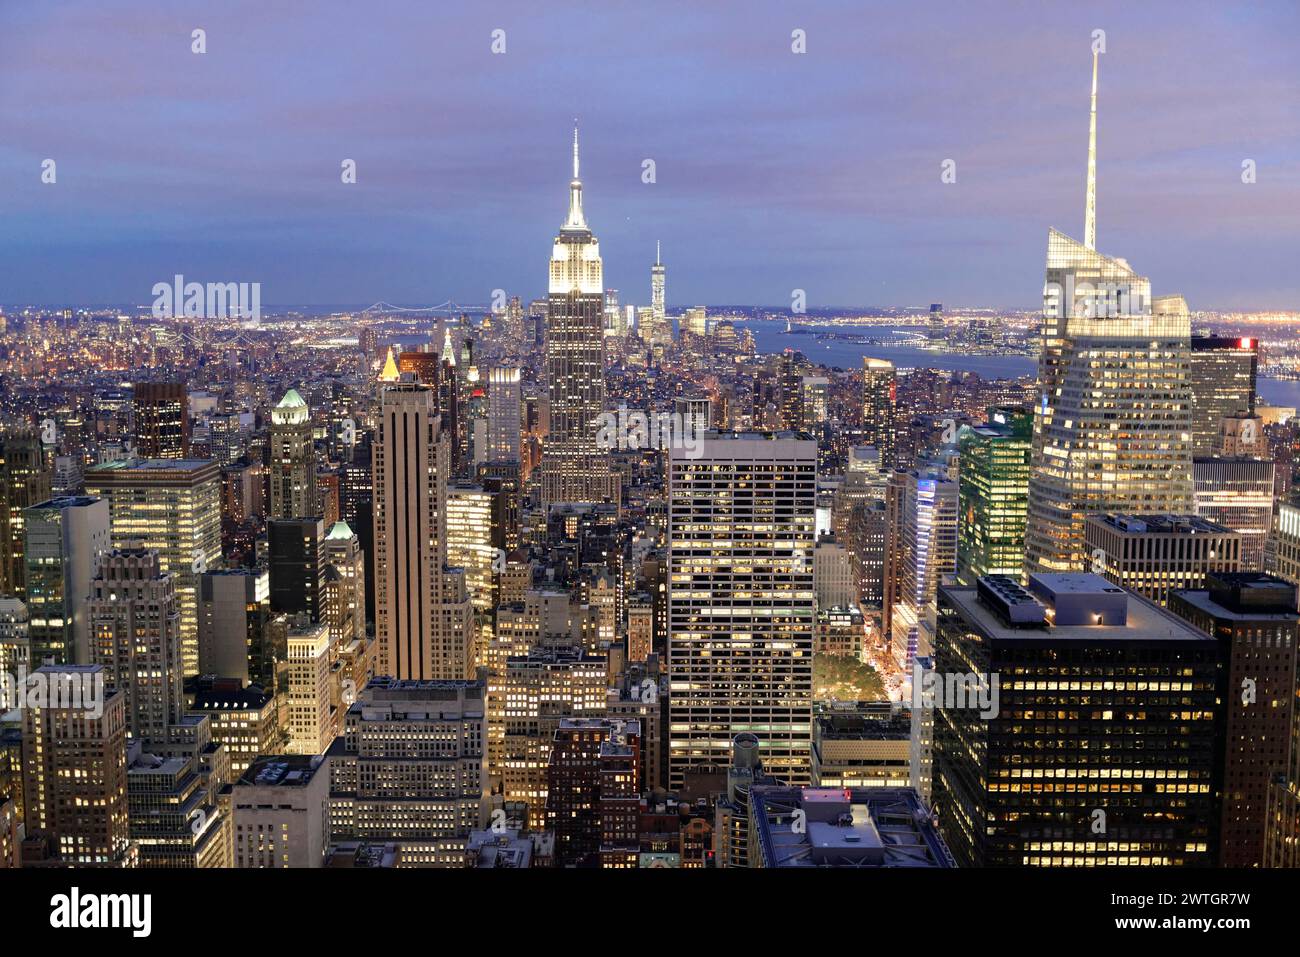 Viewing terrace of the Rockefeller Center, cityscape with illuminated buildings at dusk, Manhattan, New York City, New York, USA, North America Stock Photo